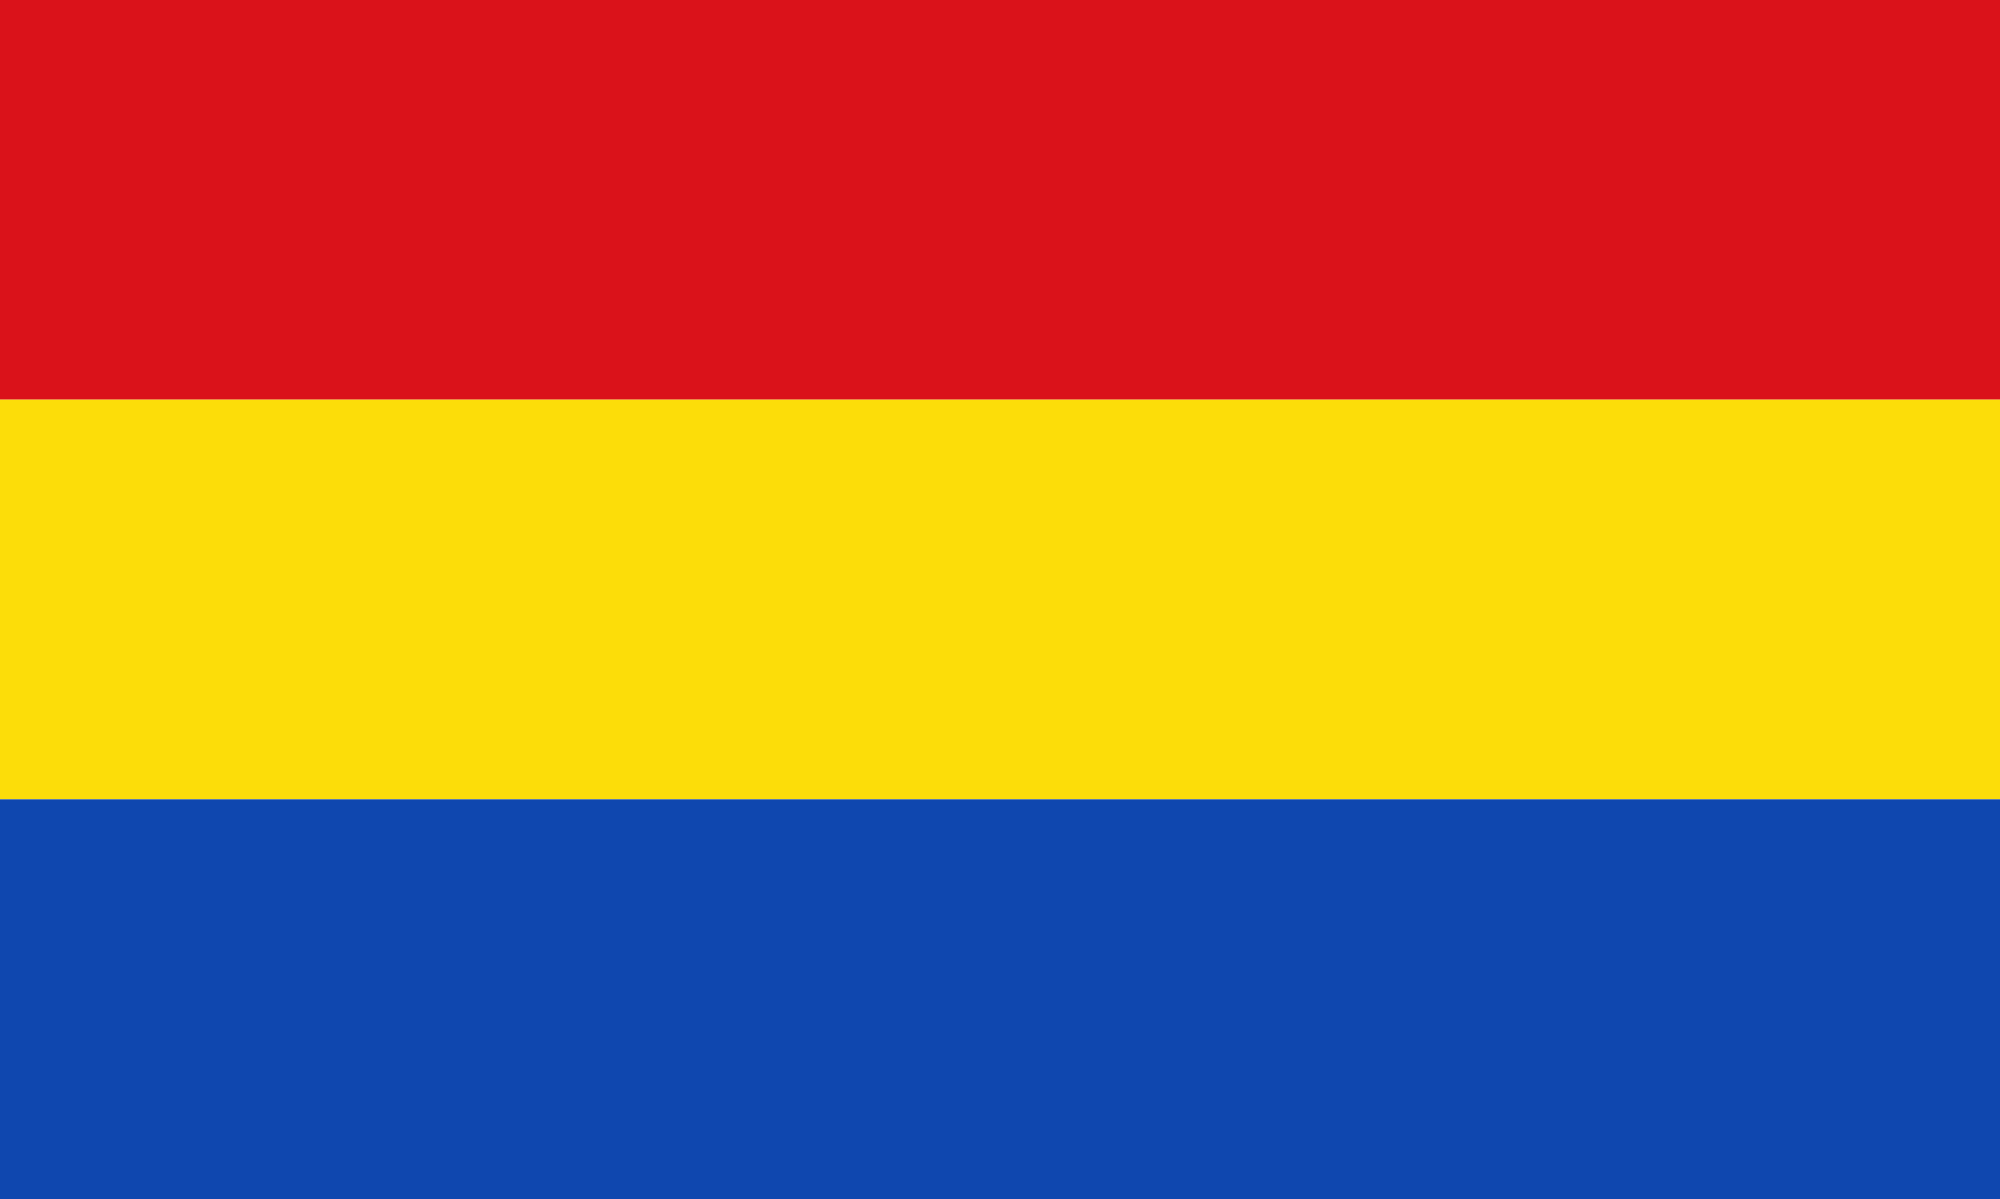 Orange and Blue Flag Logo - File:Flag red yellow blue 5x3.svg - Wikimedia Commons